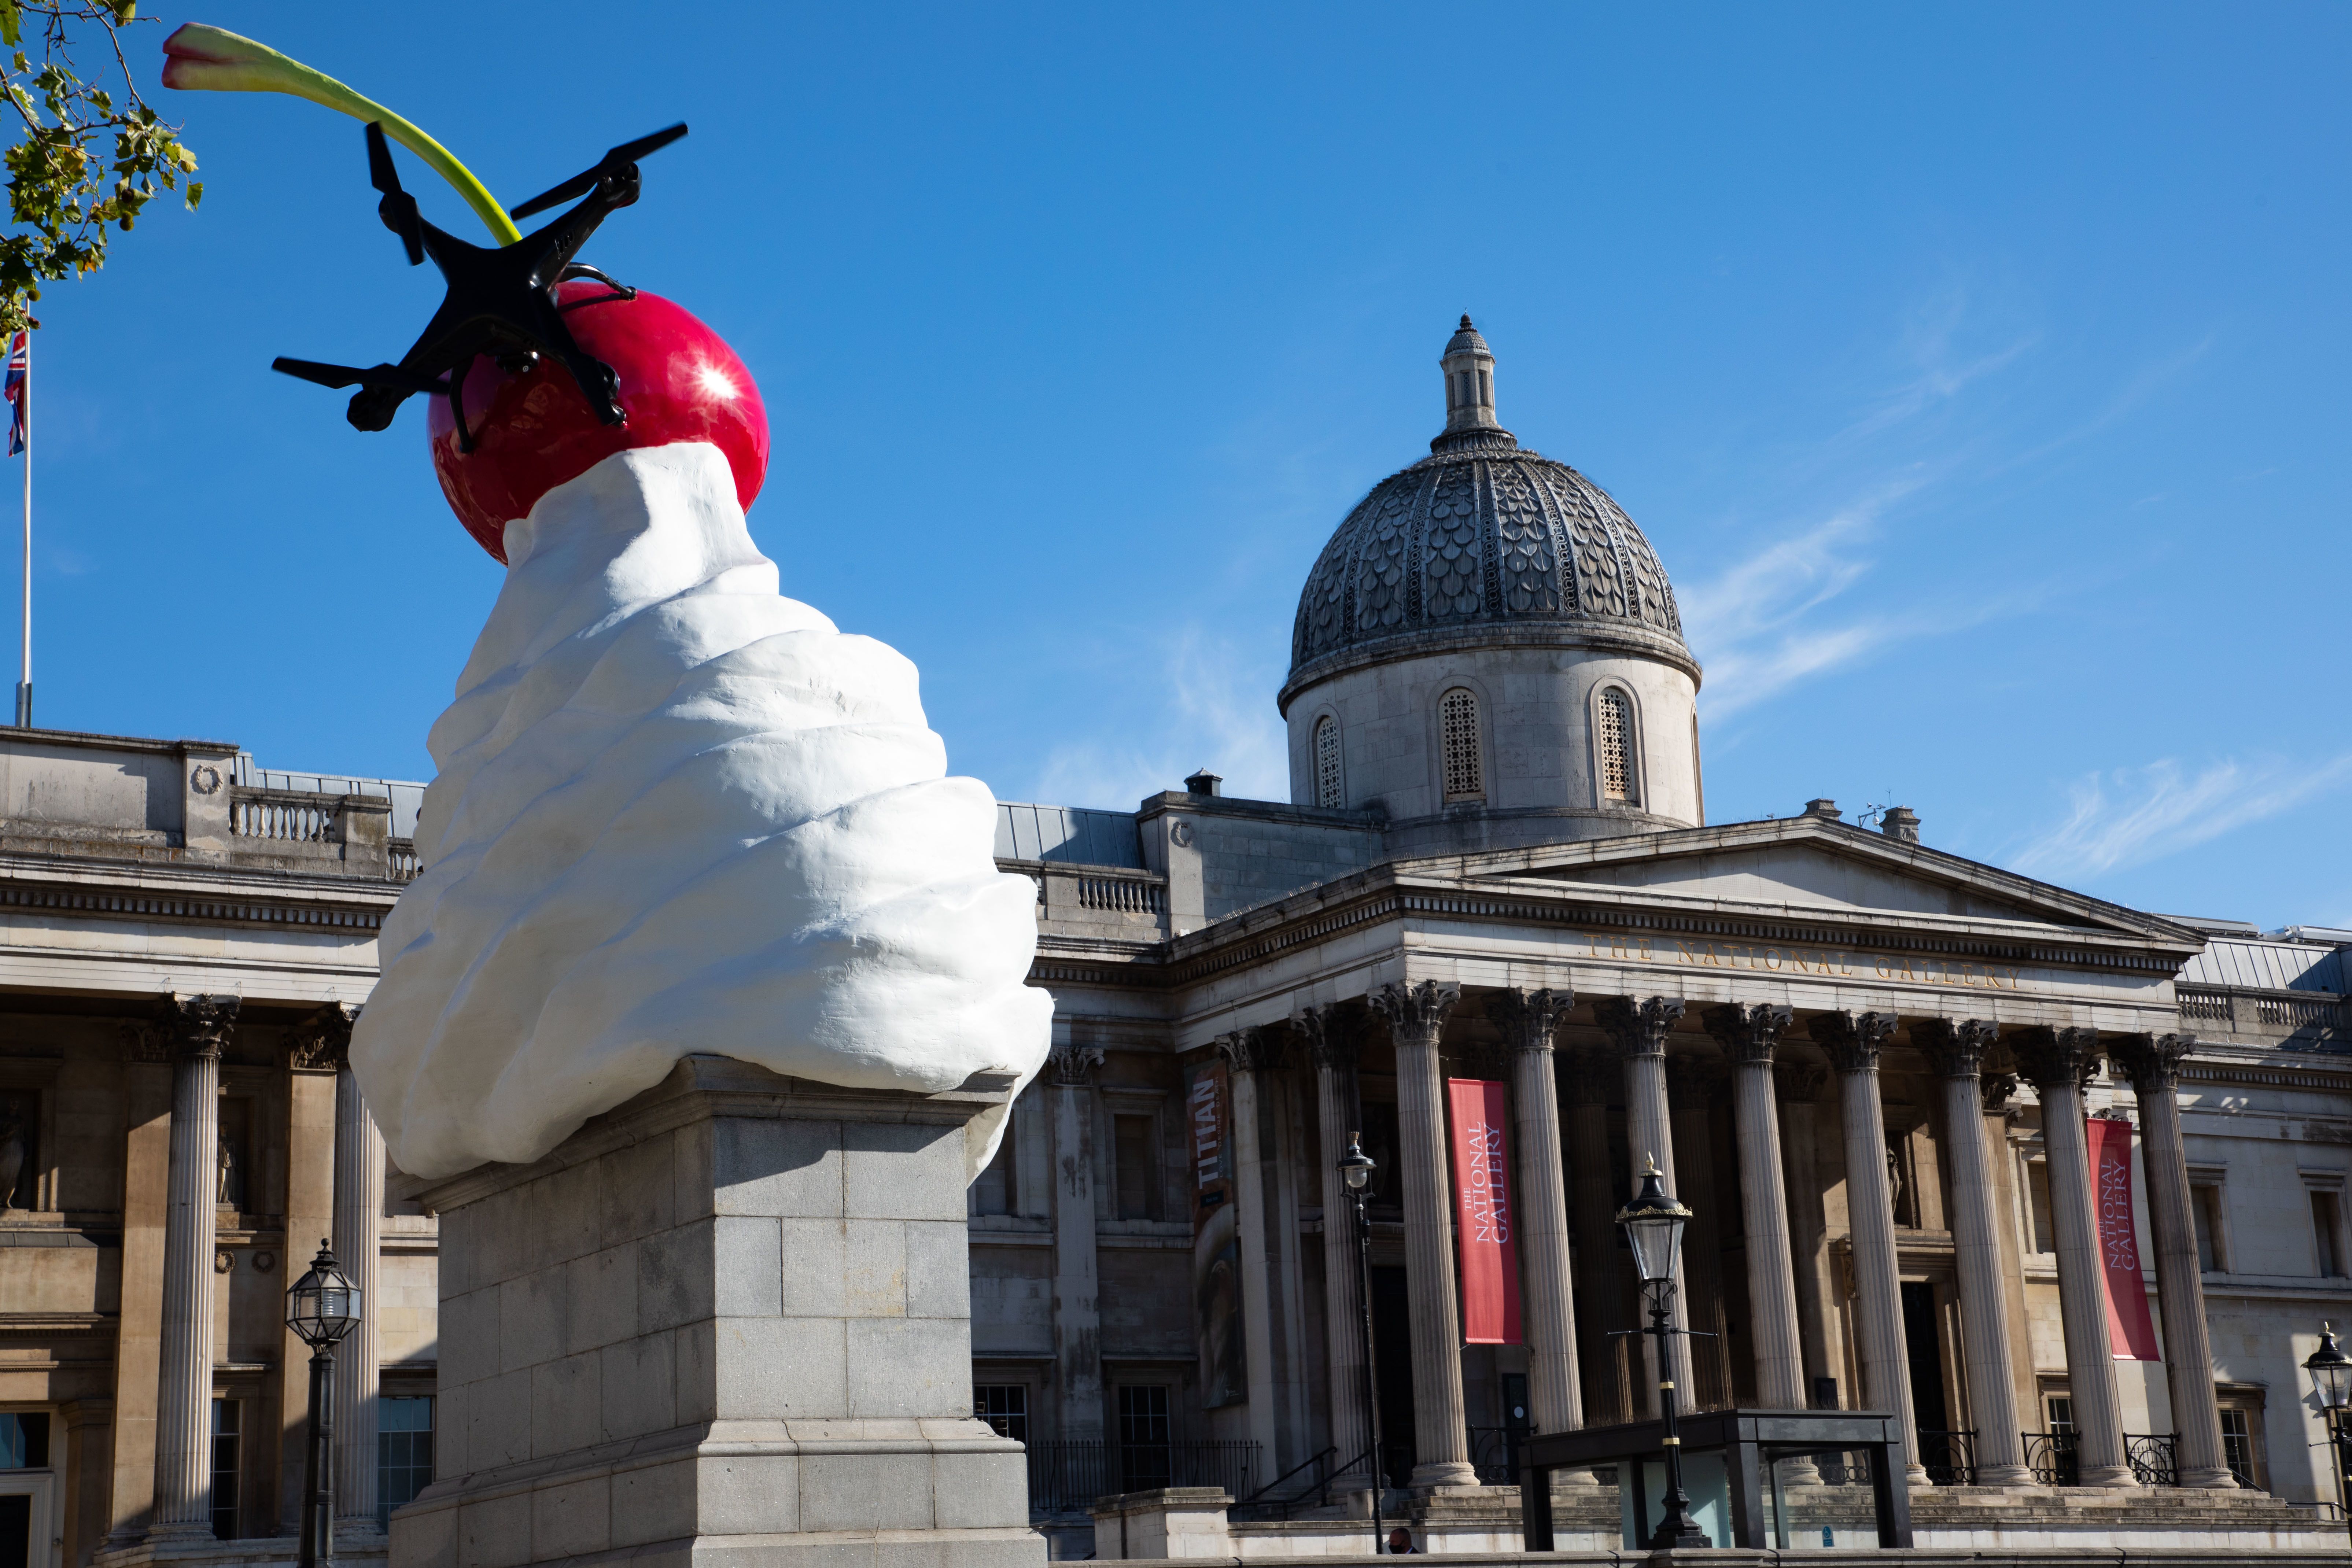 A sculpture of an ice cream with a cherry in it on top of a plinth in Trafalgar Square